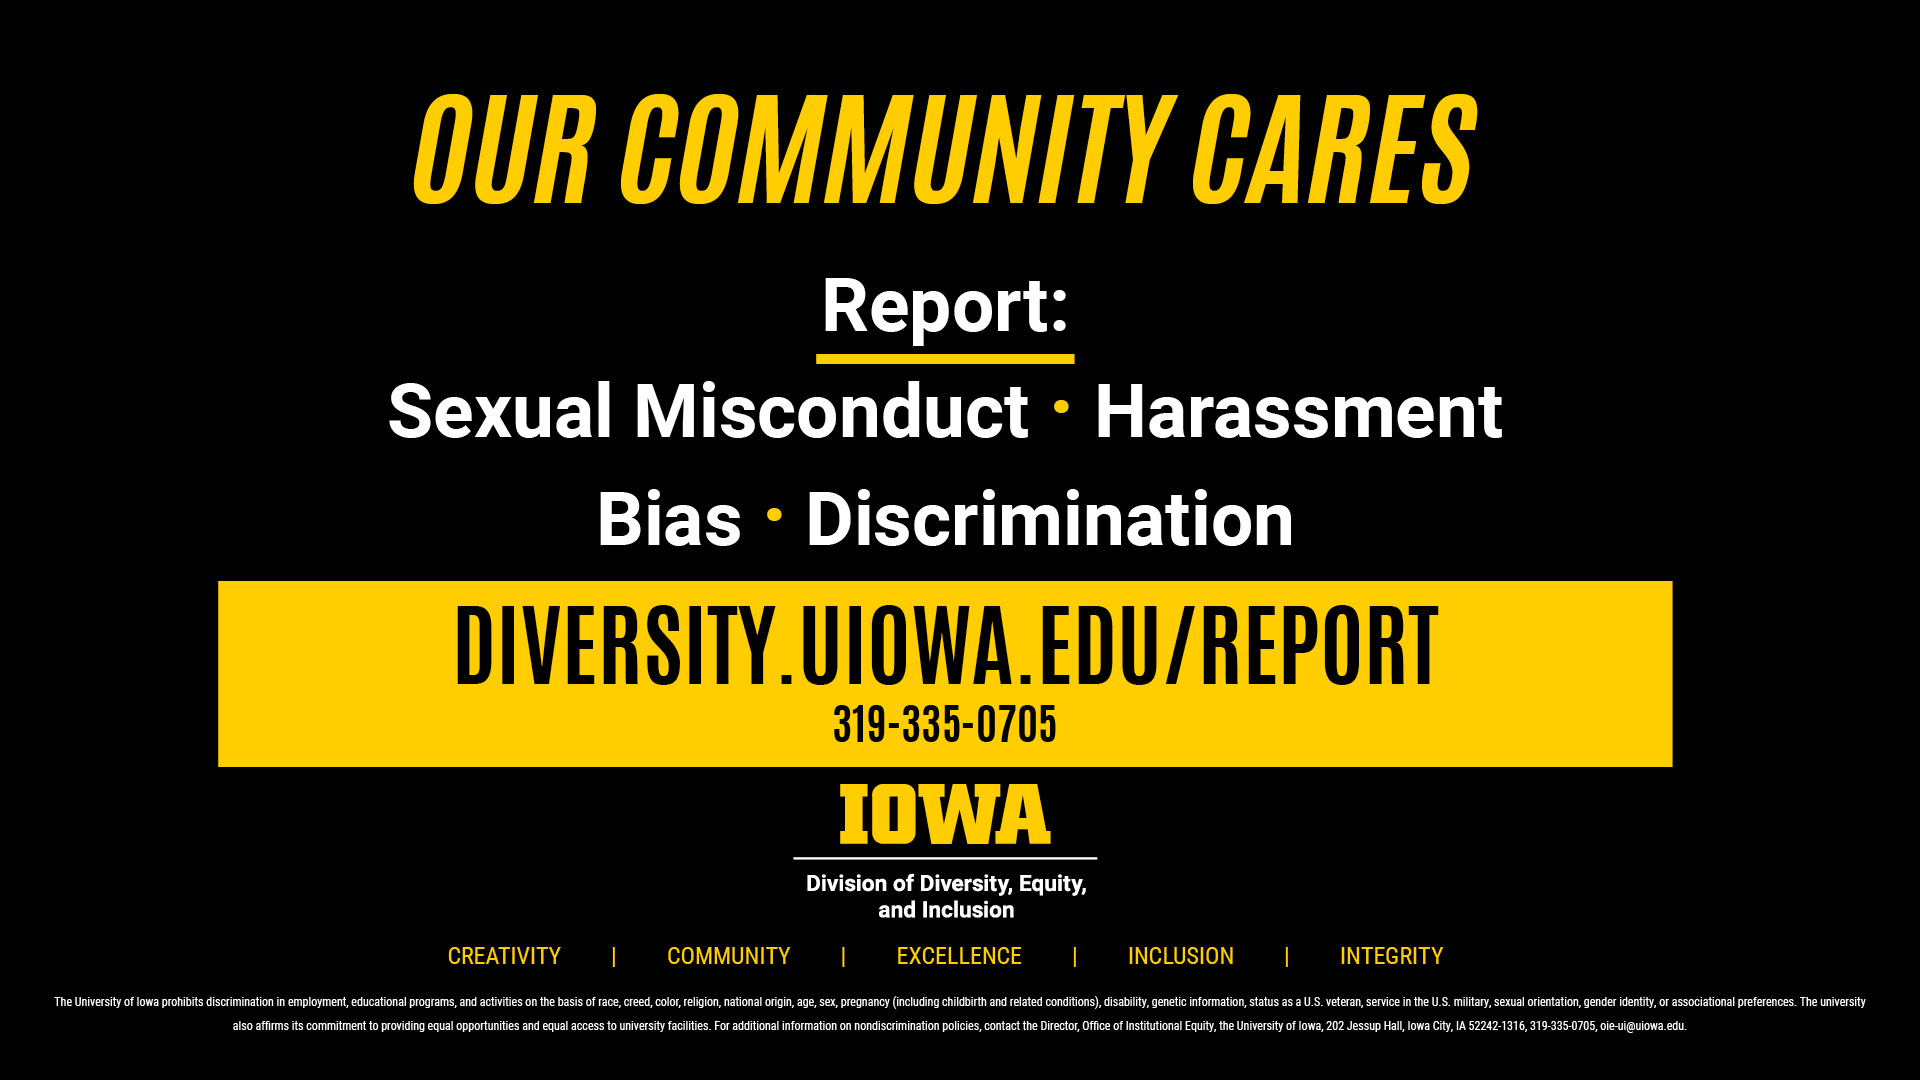 Our Community Cares. View the report on sexual misconduct, harassment, bias and discrimination at diversity.uiowa.edu/report for more information.